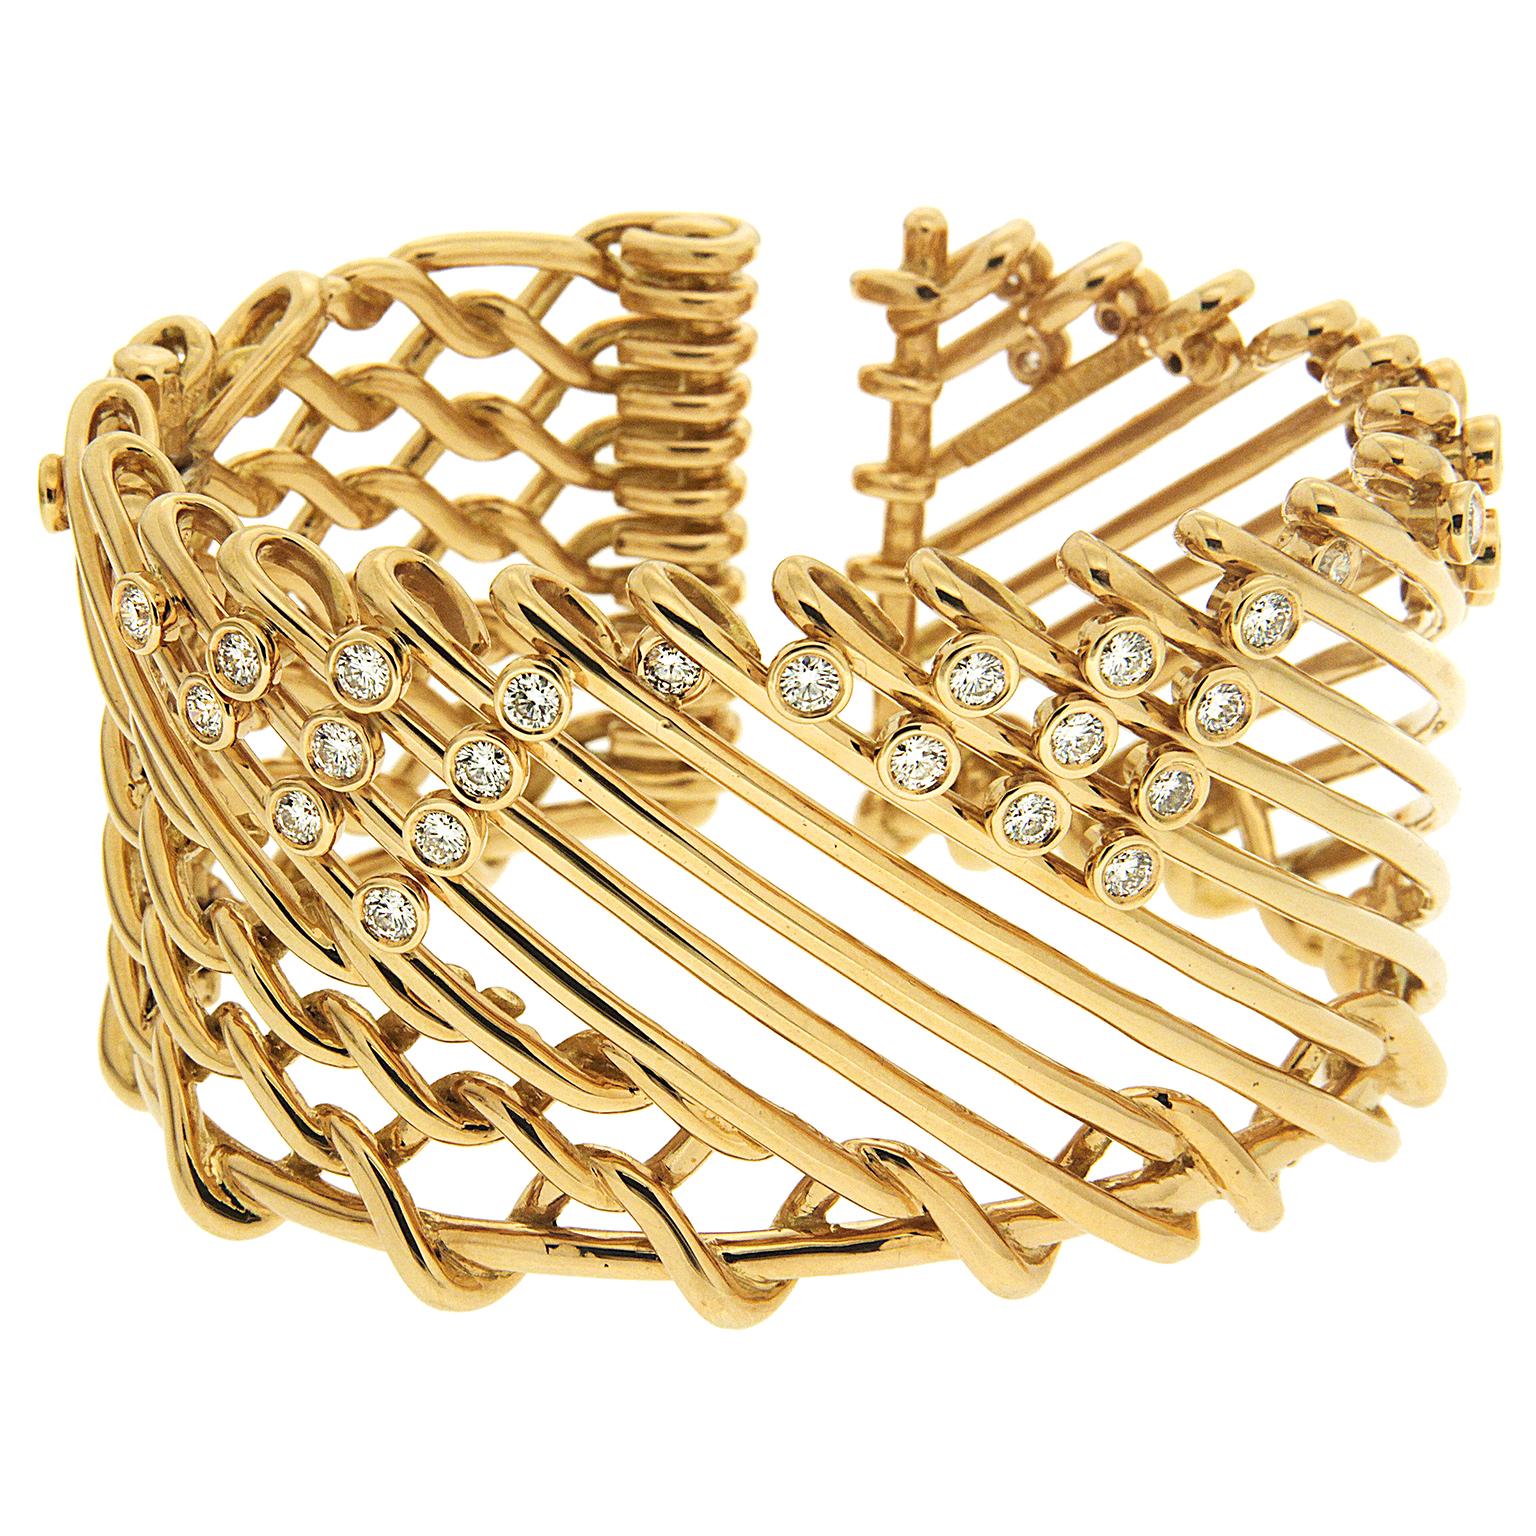 Valentin Magro Diamond Gold Triangular Motif Netting Bracelet showcases different forms of openwork. Some of its 18k yellow gold interlocks with one another, forming links. The rest of the bracelet showcases diagonal gold strips. Bezel set round